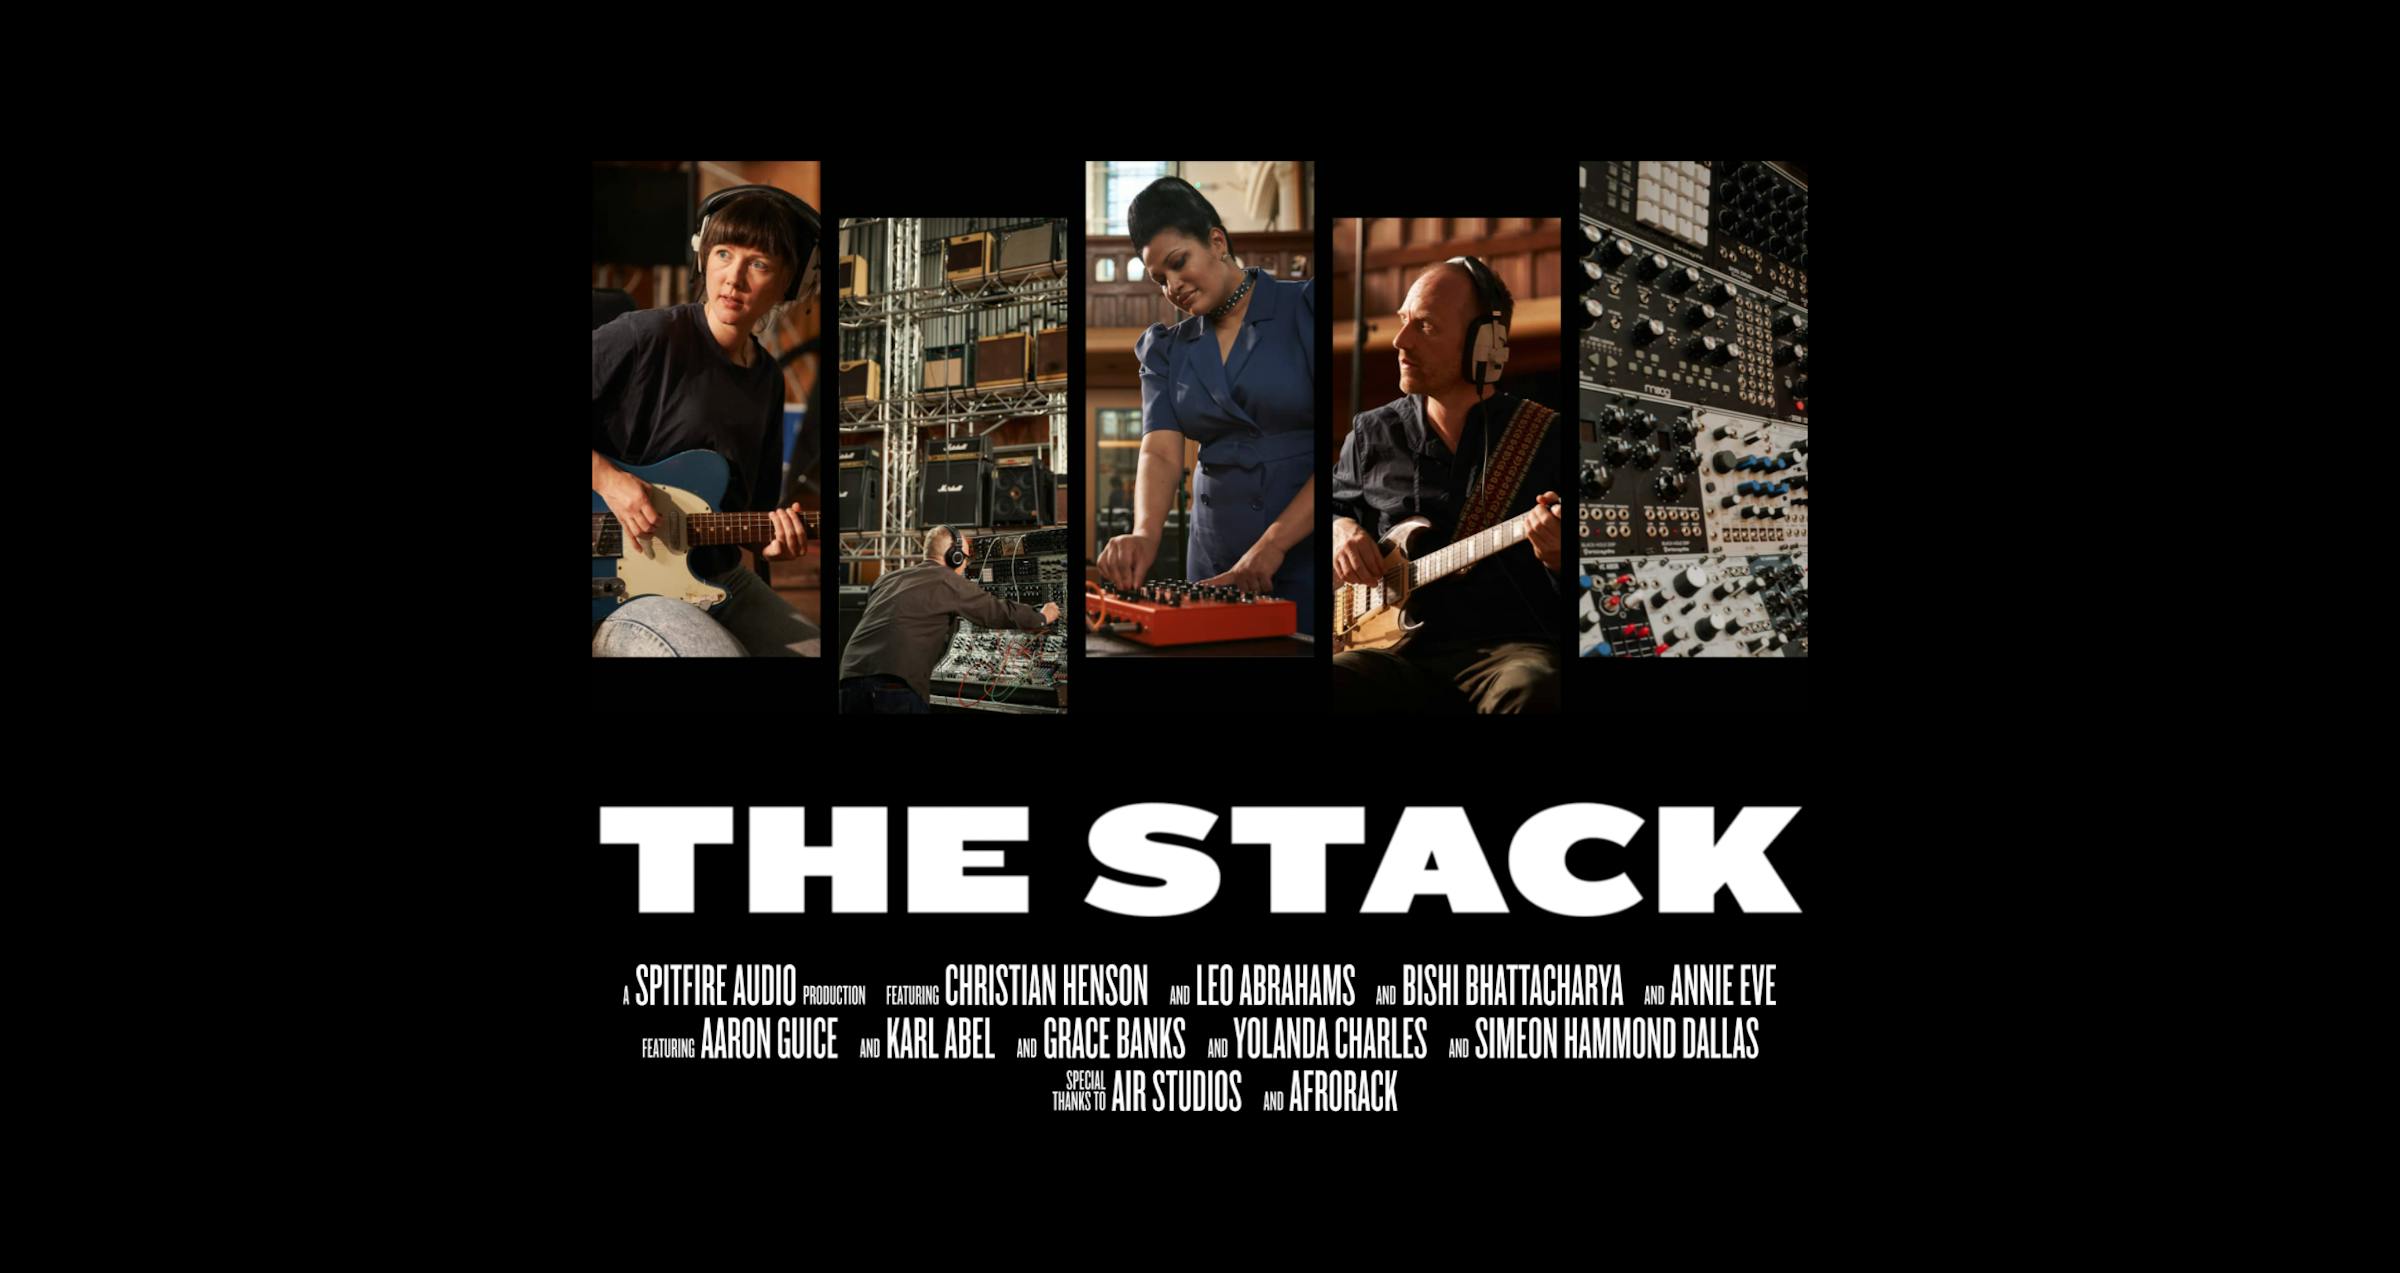 The stack musicians and credits